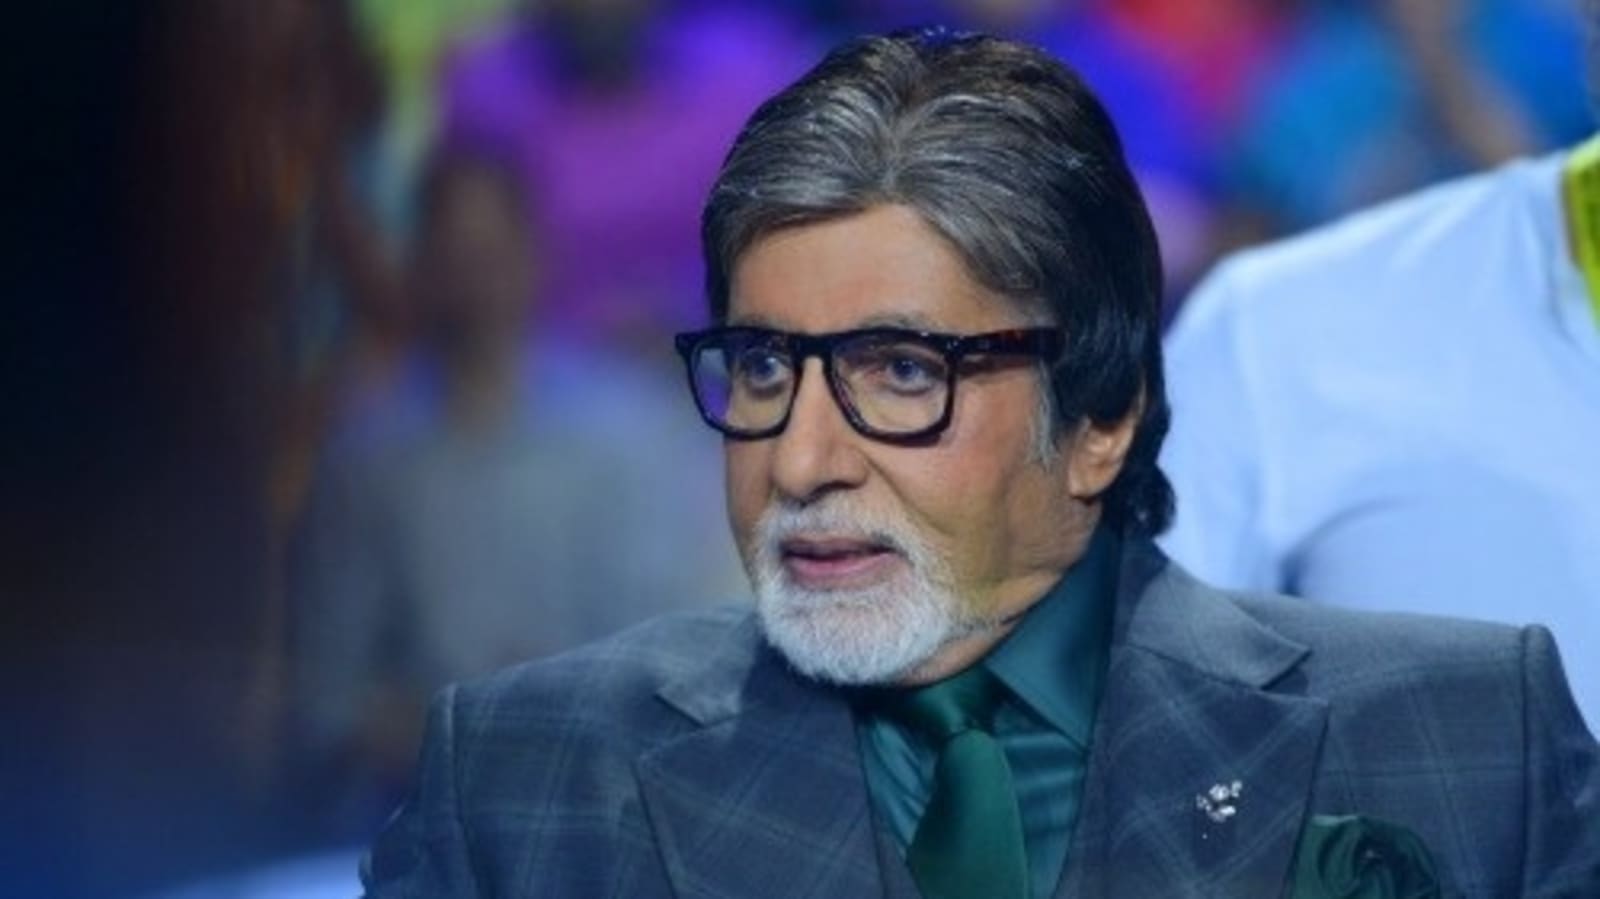 Why is Amitabh Bachchan called most successful when he doesn't have any  all-time blockbusters to his name except 'Sholay,' where he was a  supporting actor? - Quora